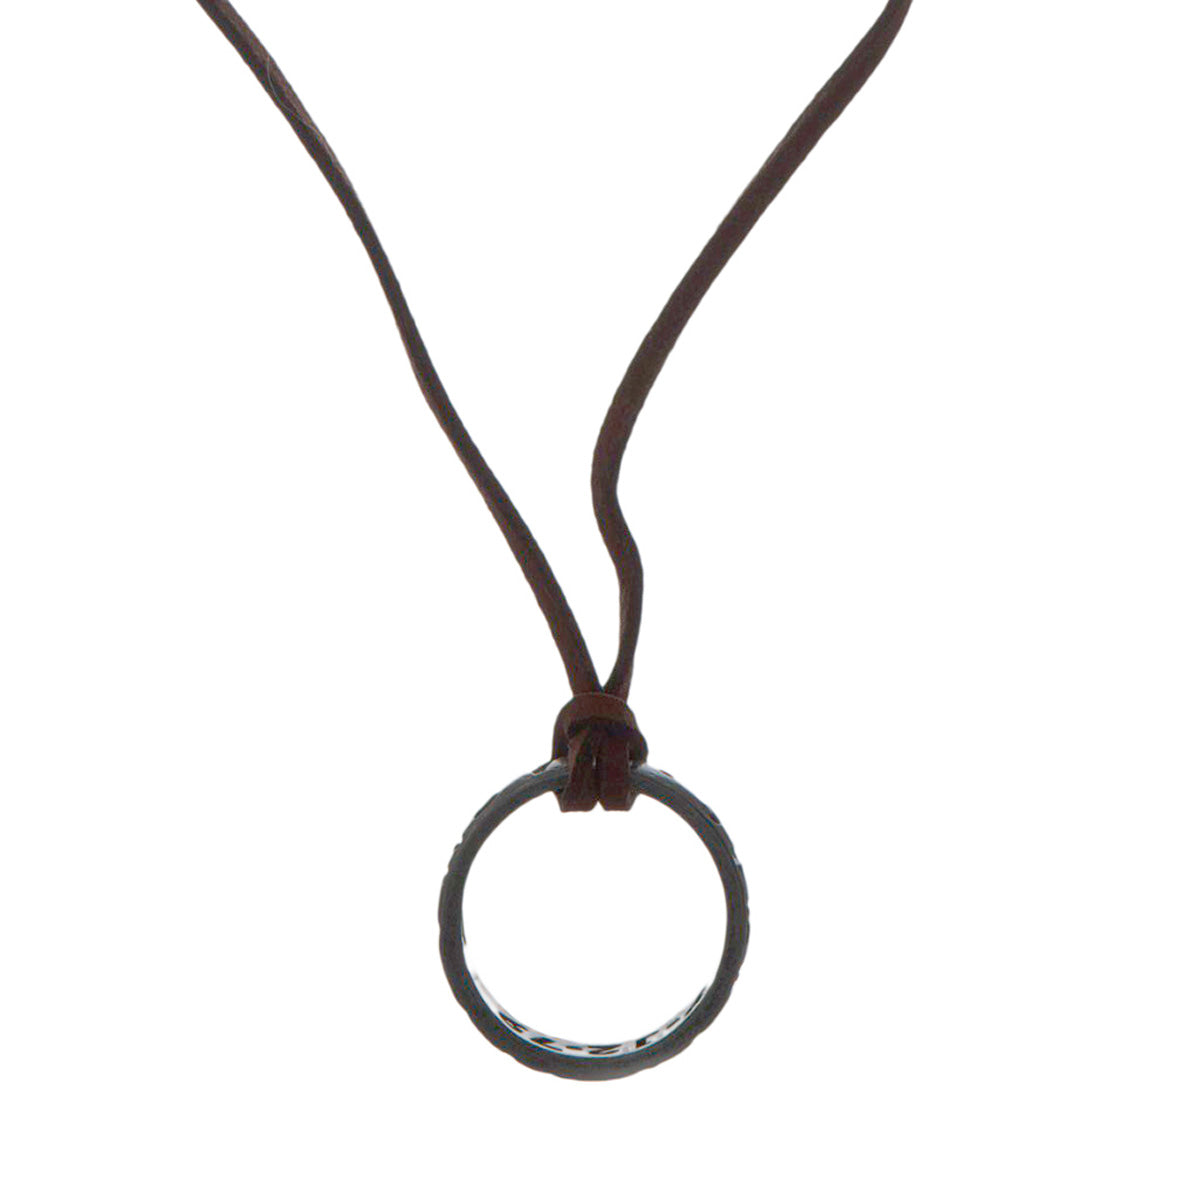 Ring pendant with leather cord necklace